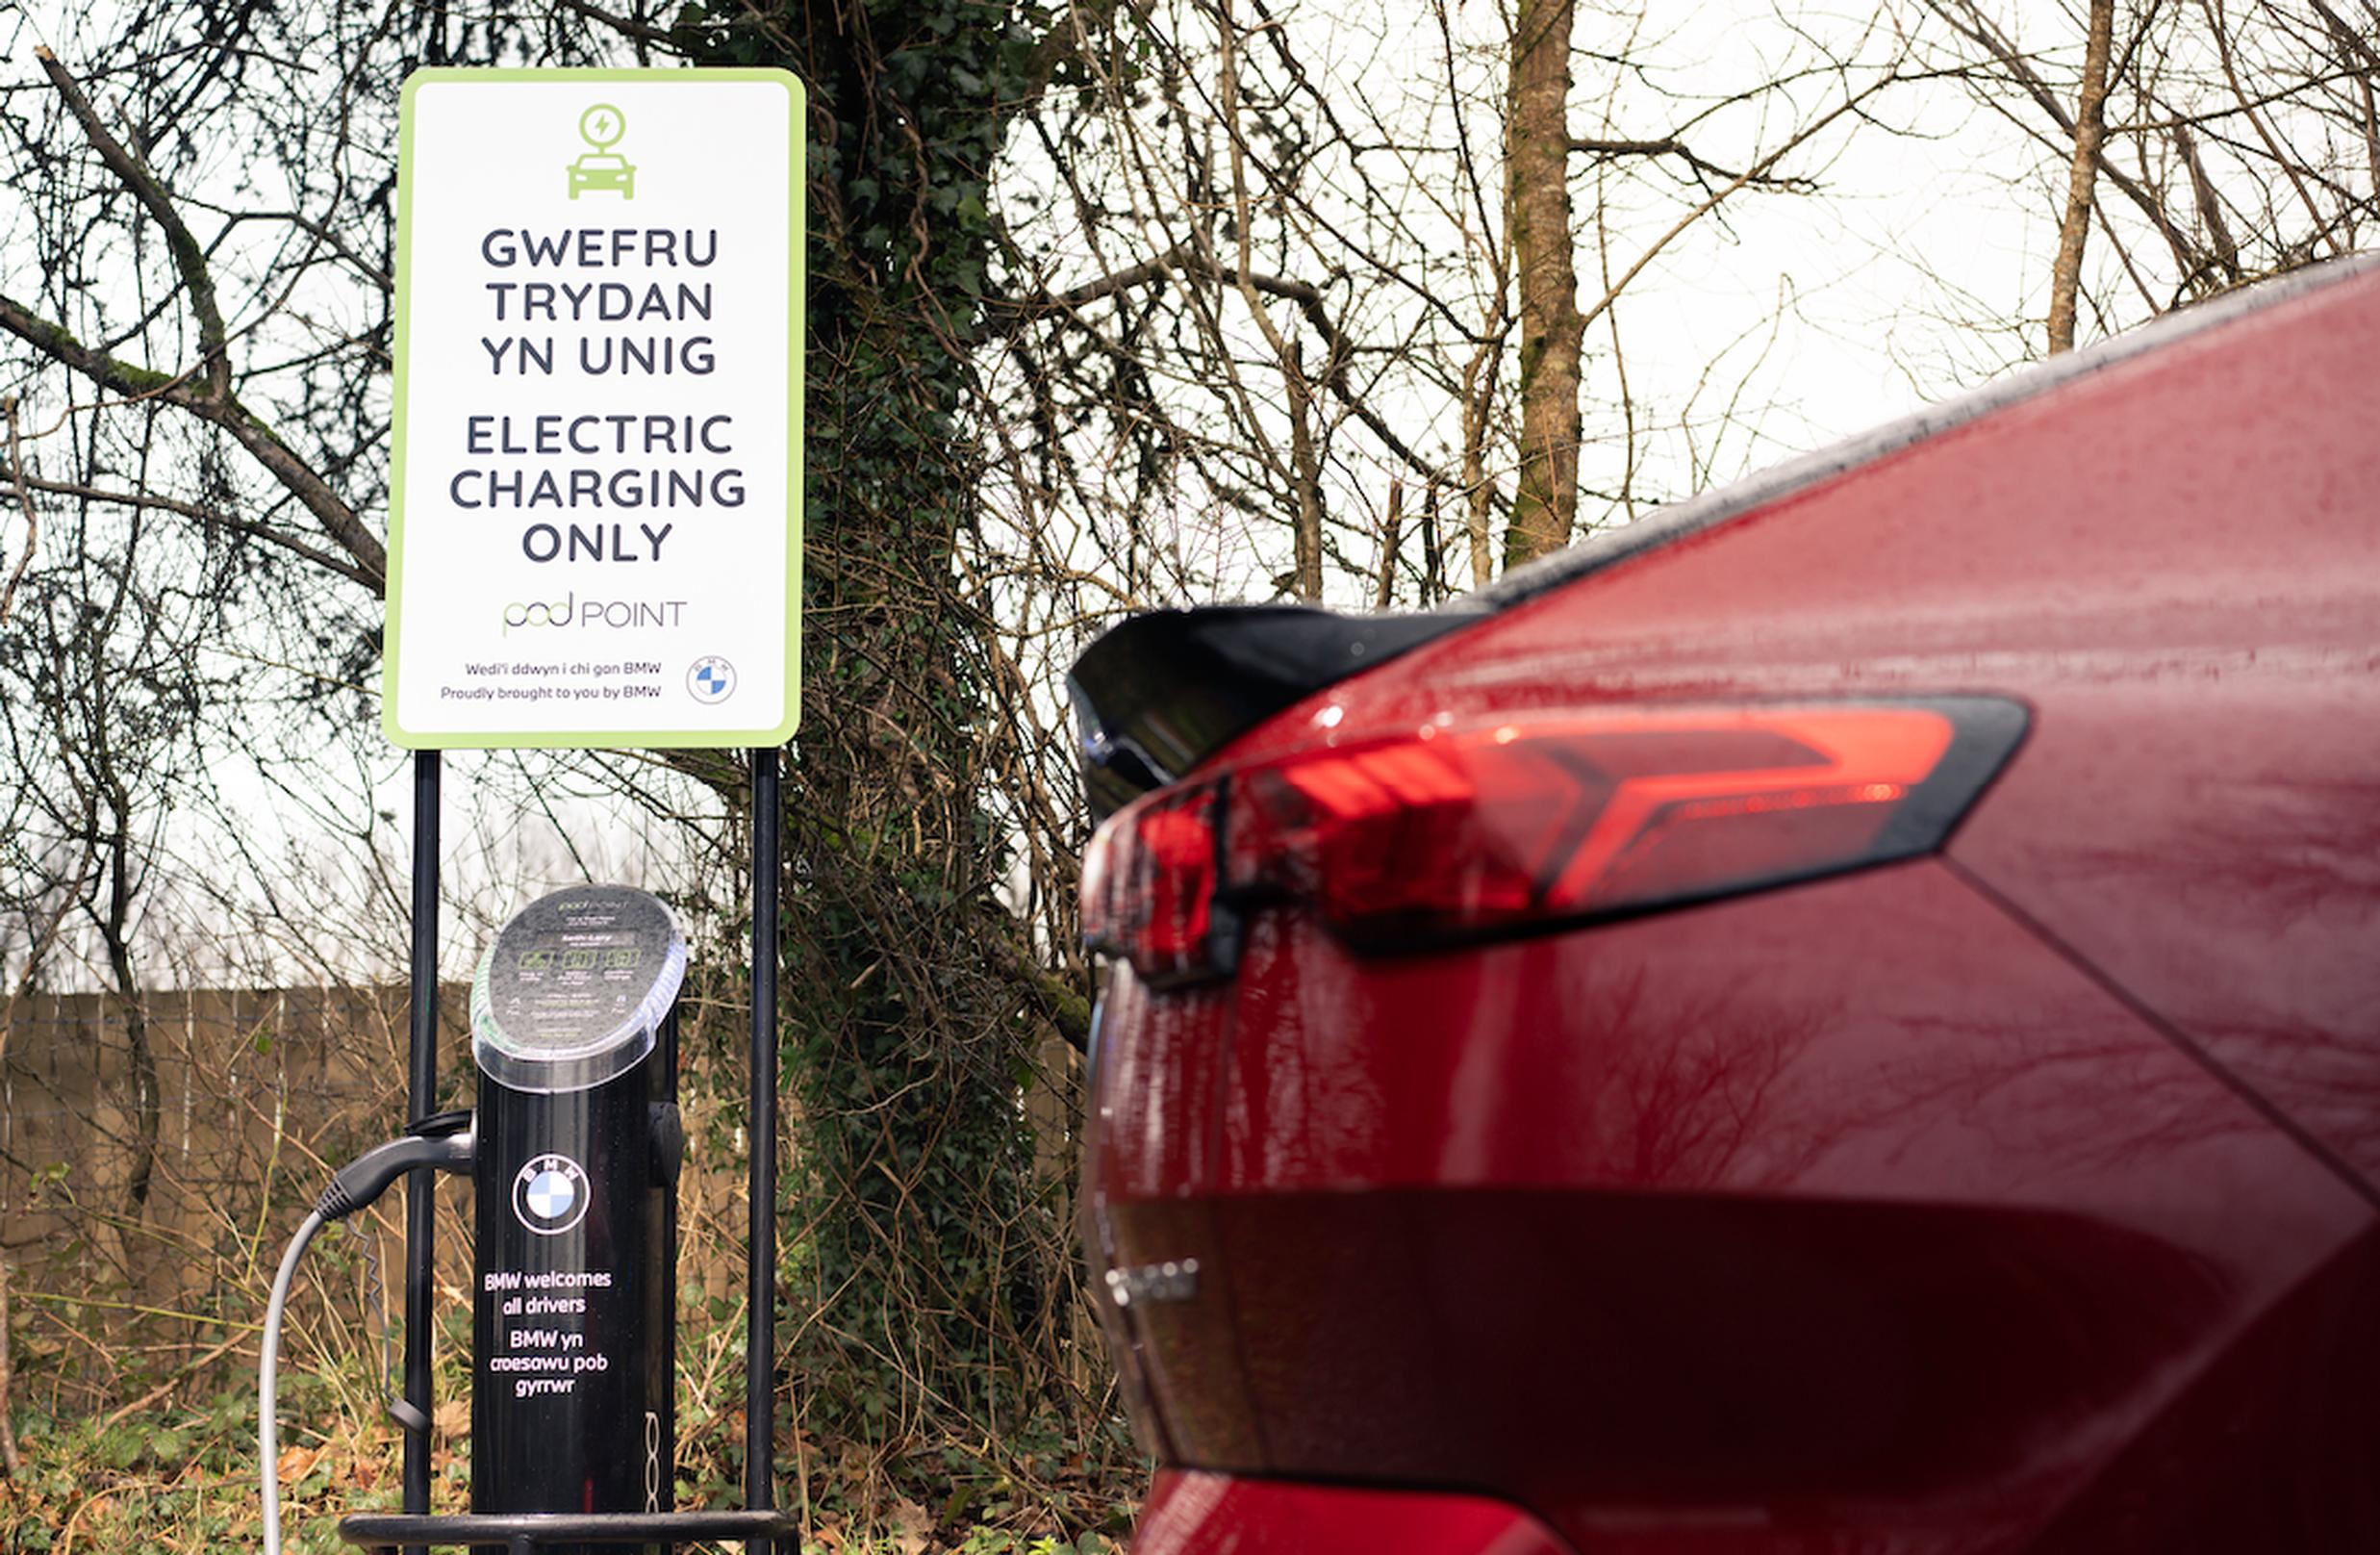 Recharge in Nature project is an initiative funded by BMW UK and facilitated by National Parks Partnerships